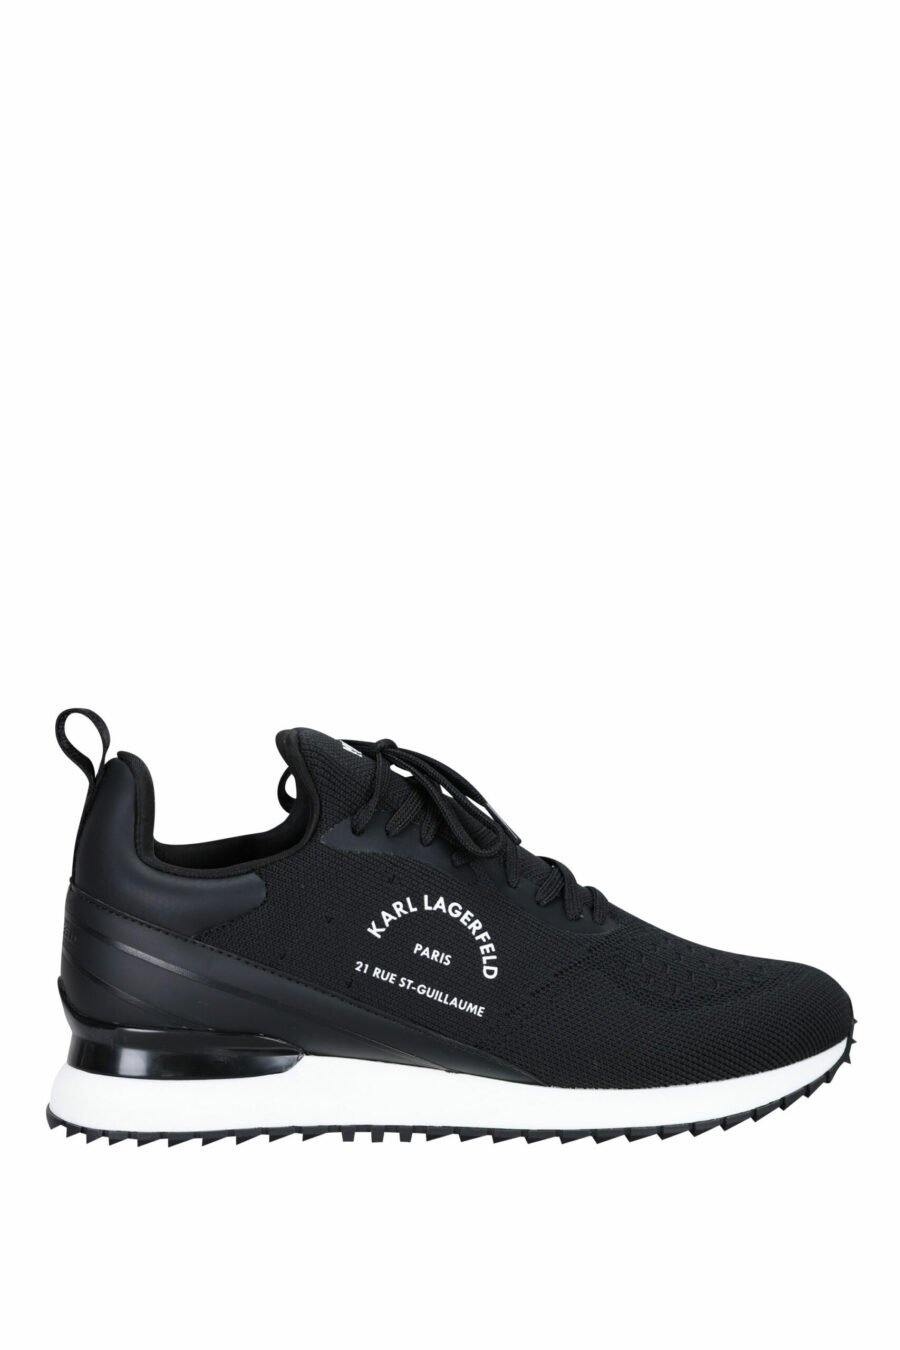 Black "velocitor" shoes with white "rue st guillaume" logo - 5059529326370 scaled